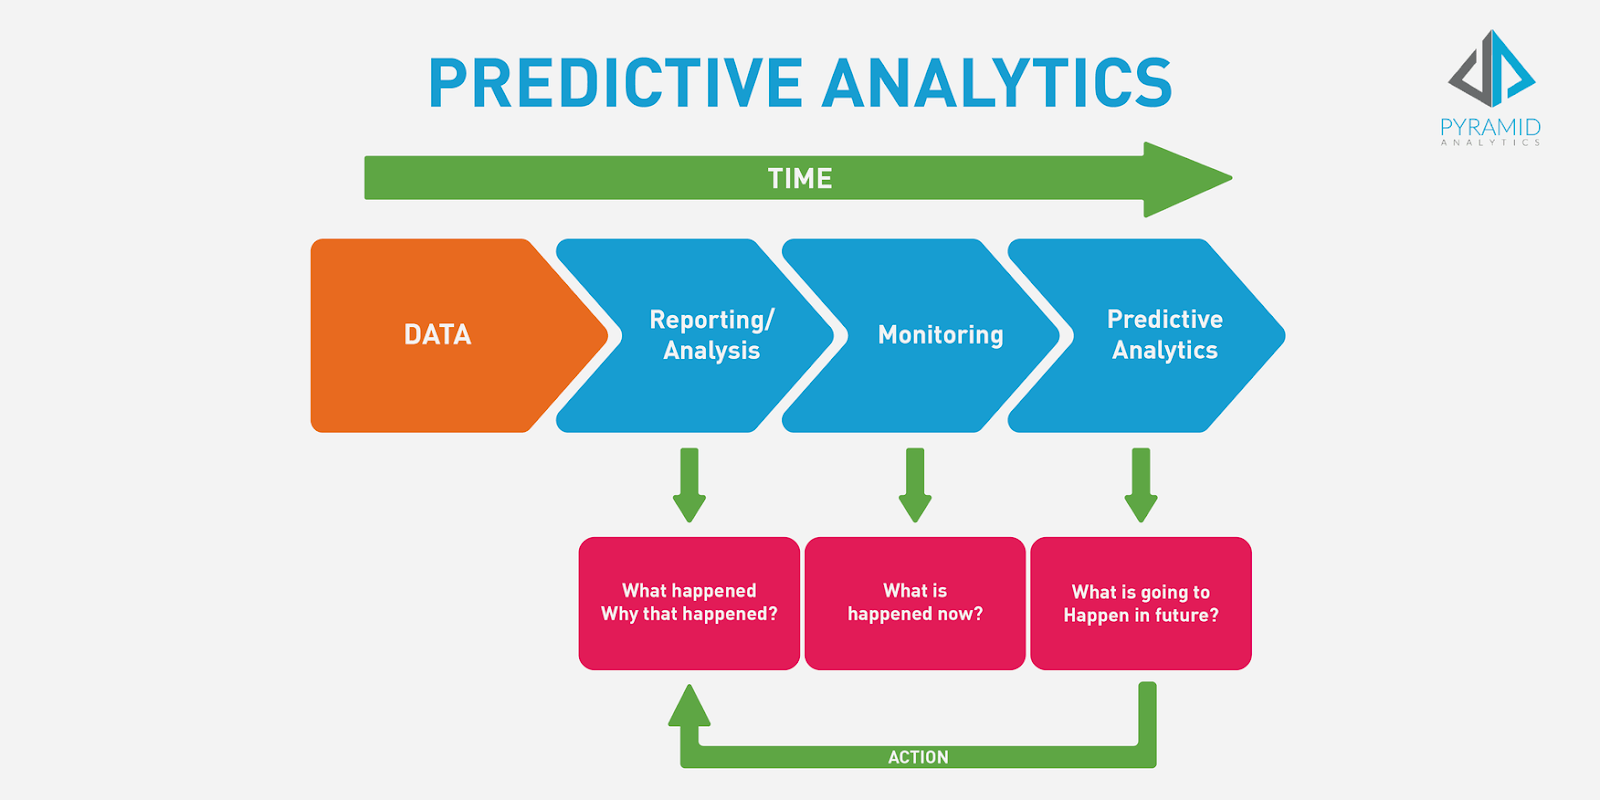 The difference between predictive analytics (what will happen) vs monitoring (what's happening) and reporting (what happened).